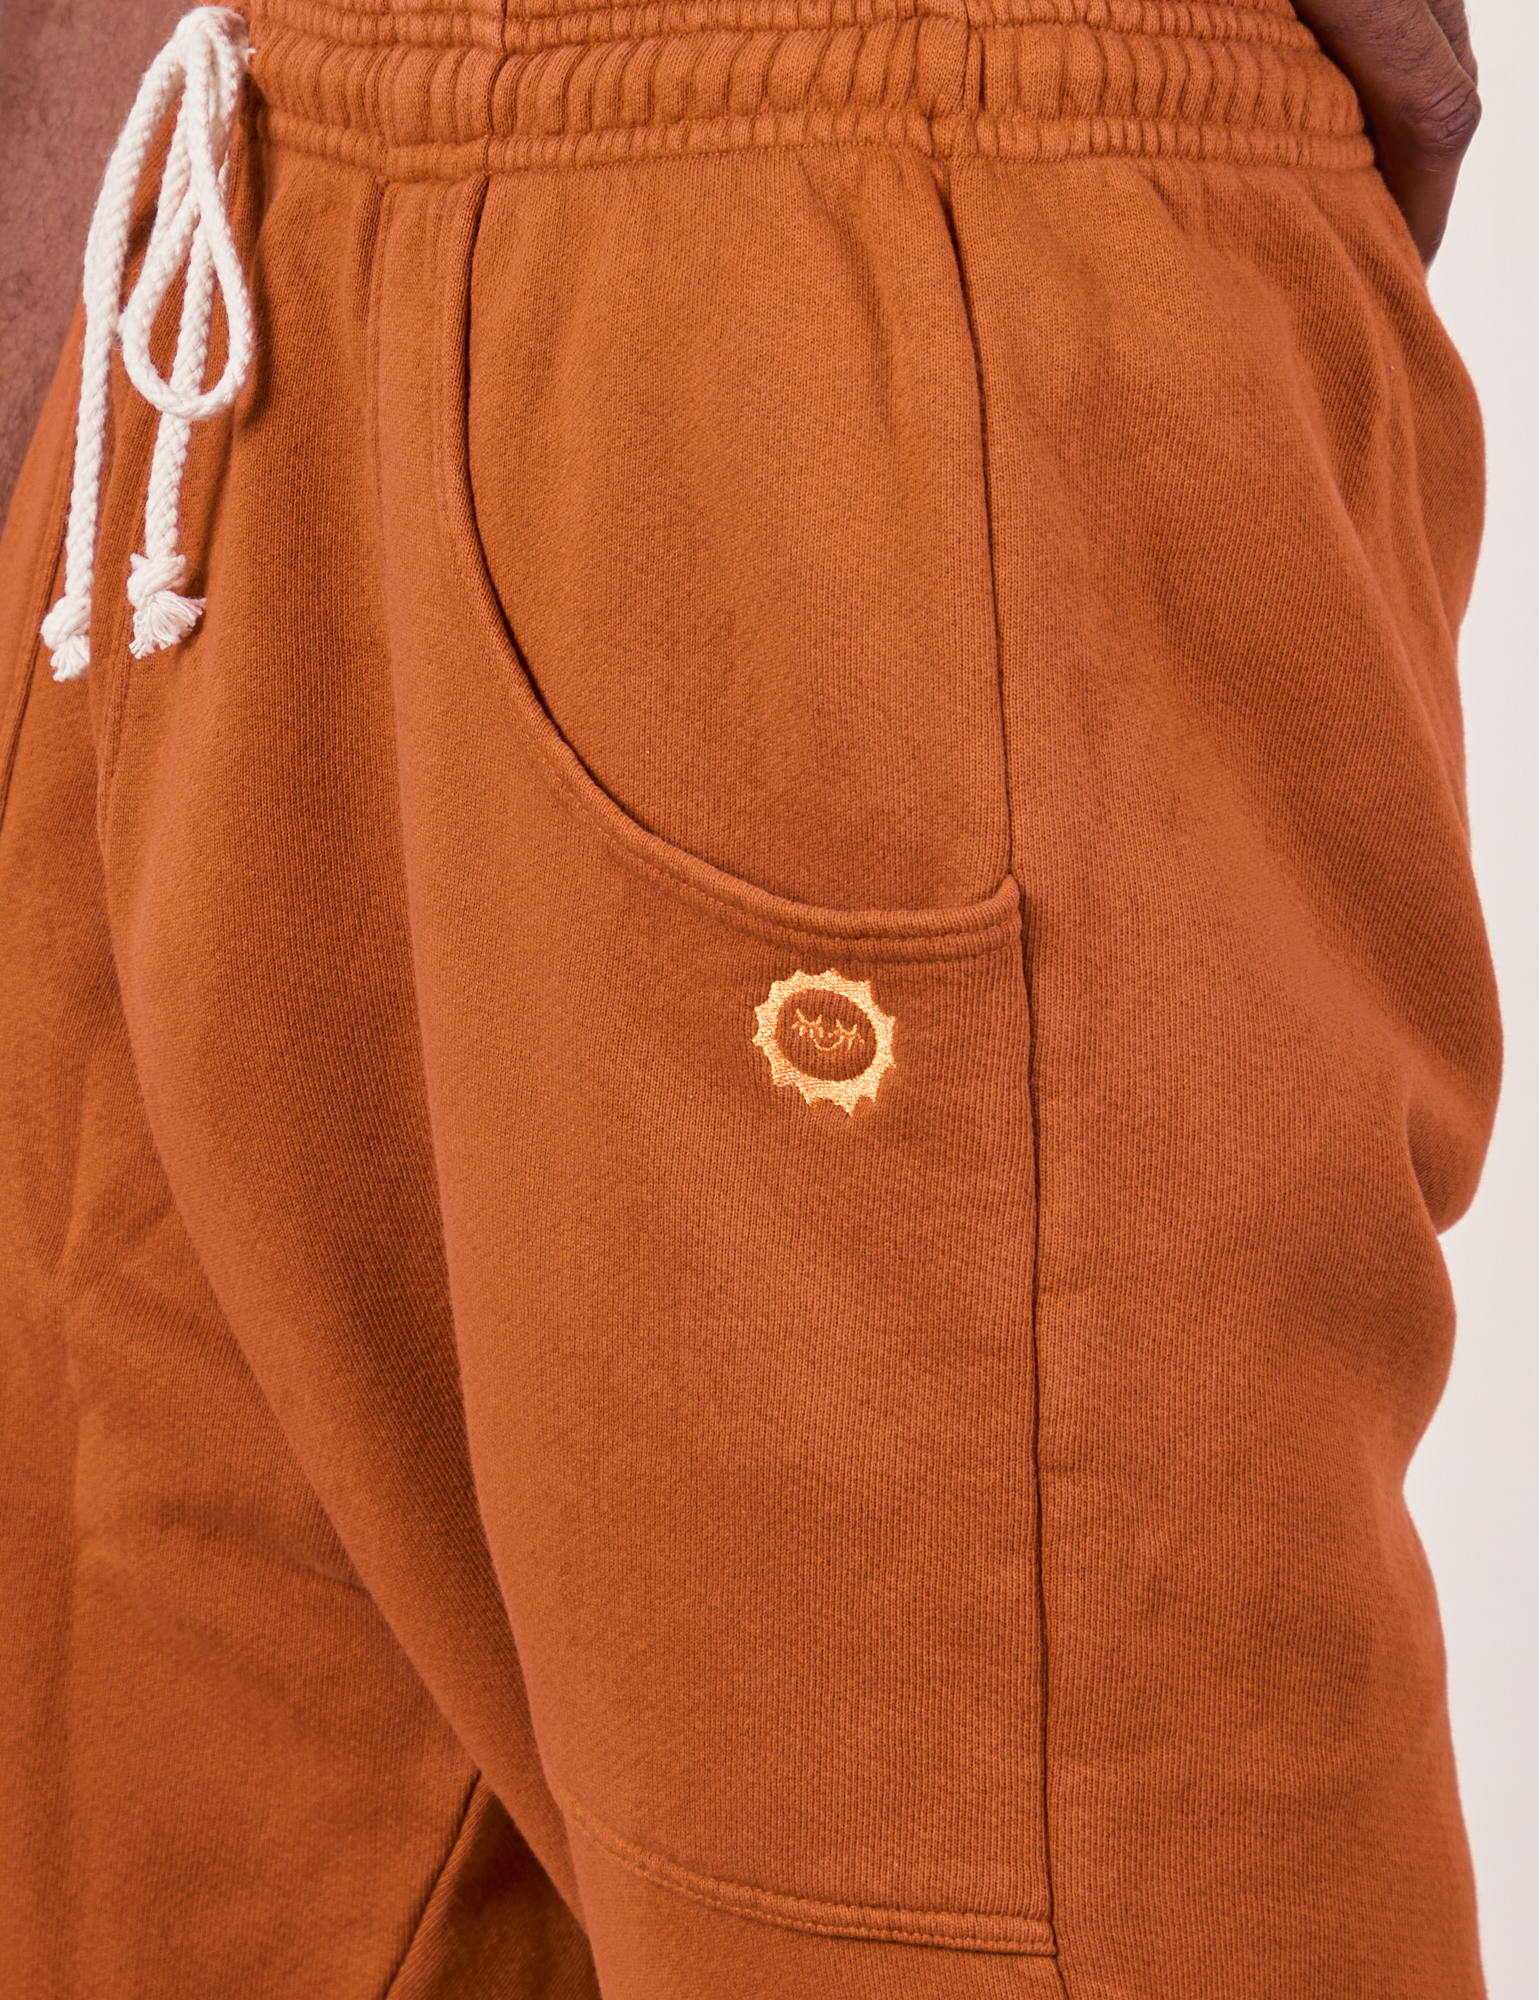 Side view close up of Cropped Rolled Cuff Sweatpants in Burnt Terracotta on Jerrod. Embroidered Sun Baby logo on pocket.